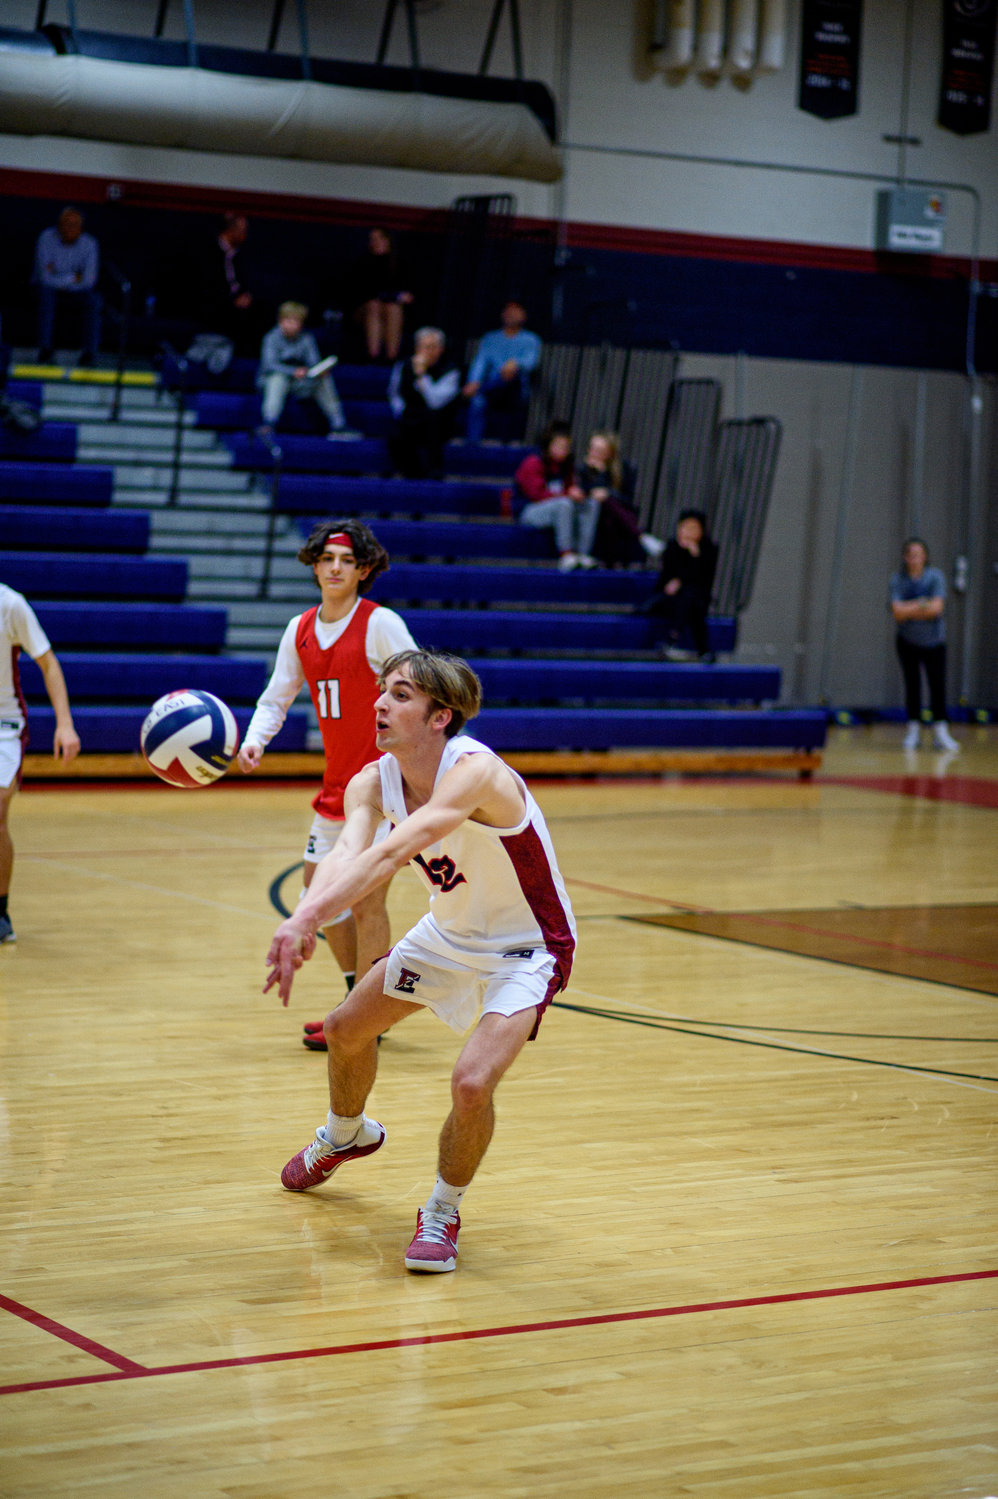 CB East’s AJ Helveston contributed three kills, one ace and four digs in his team’s victory.